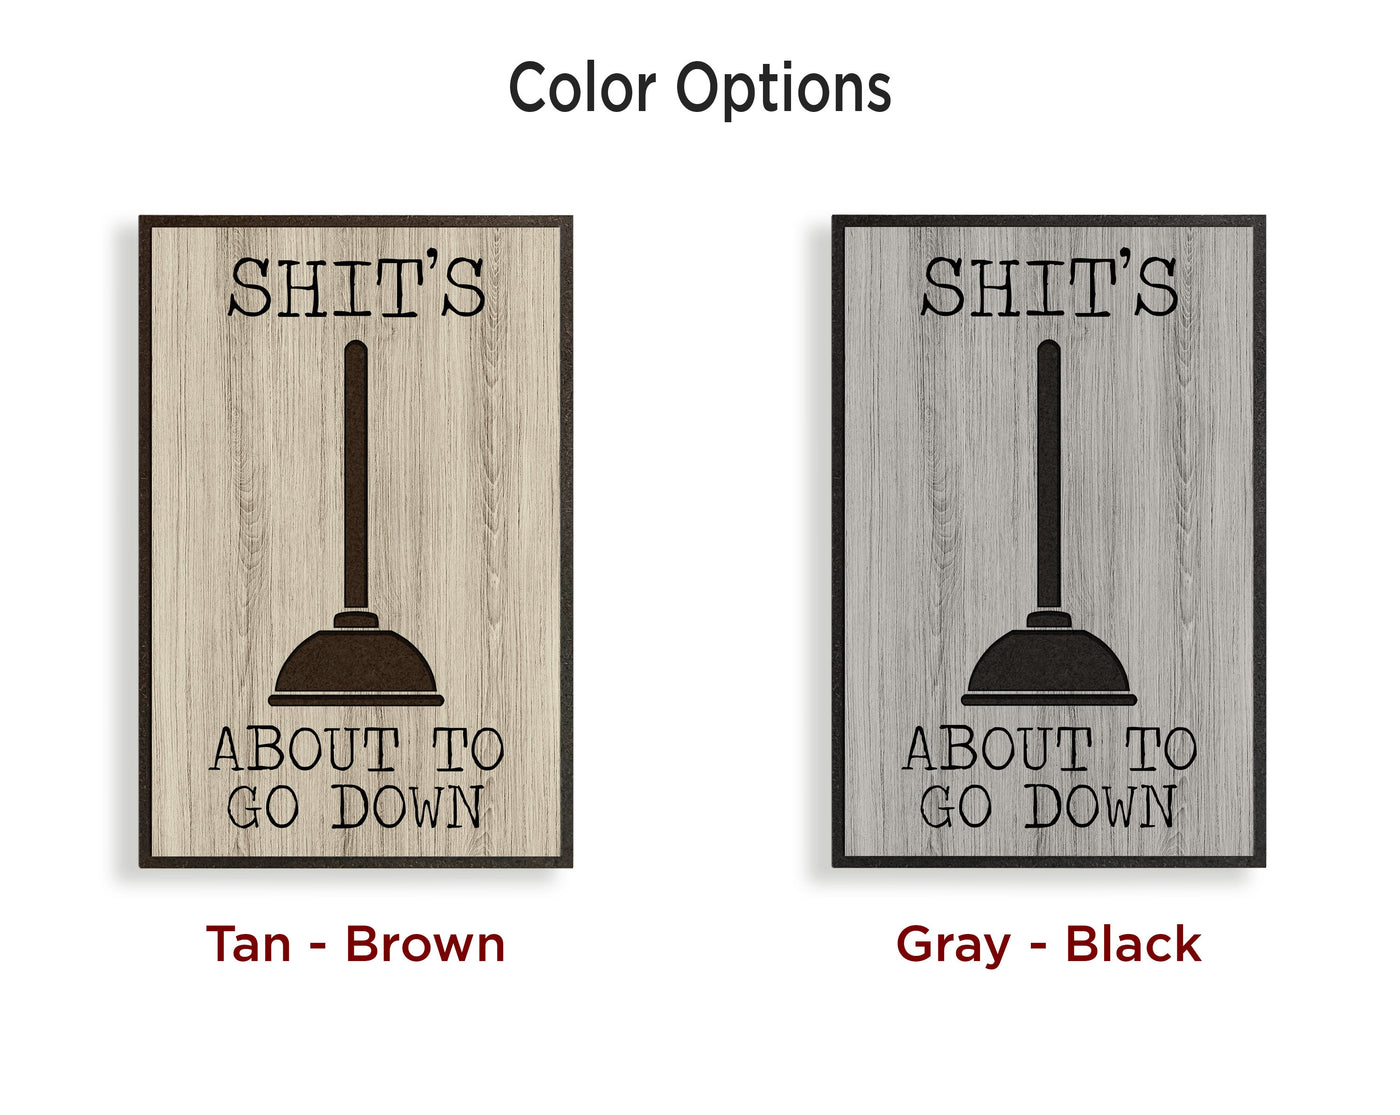 Shit's about to go down - funny bathroom decor and custom wood wall art